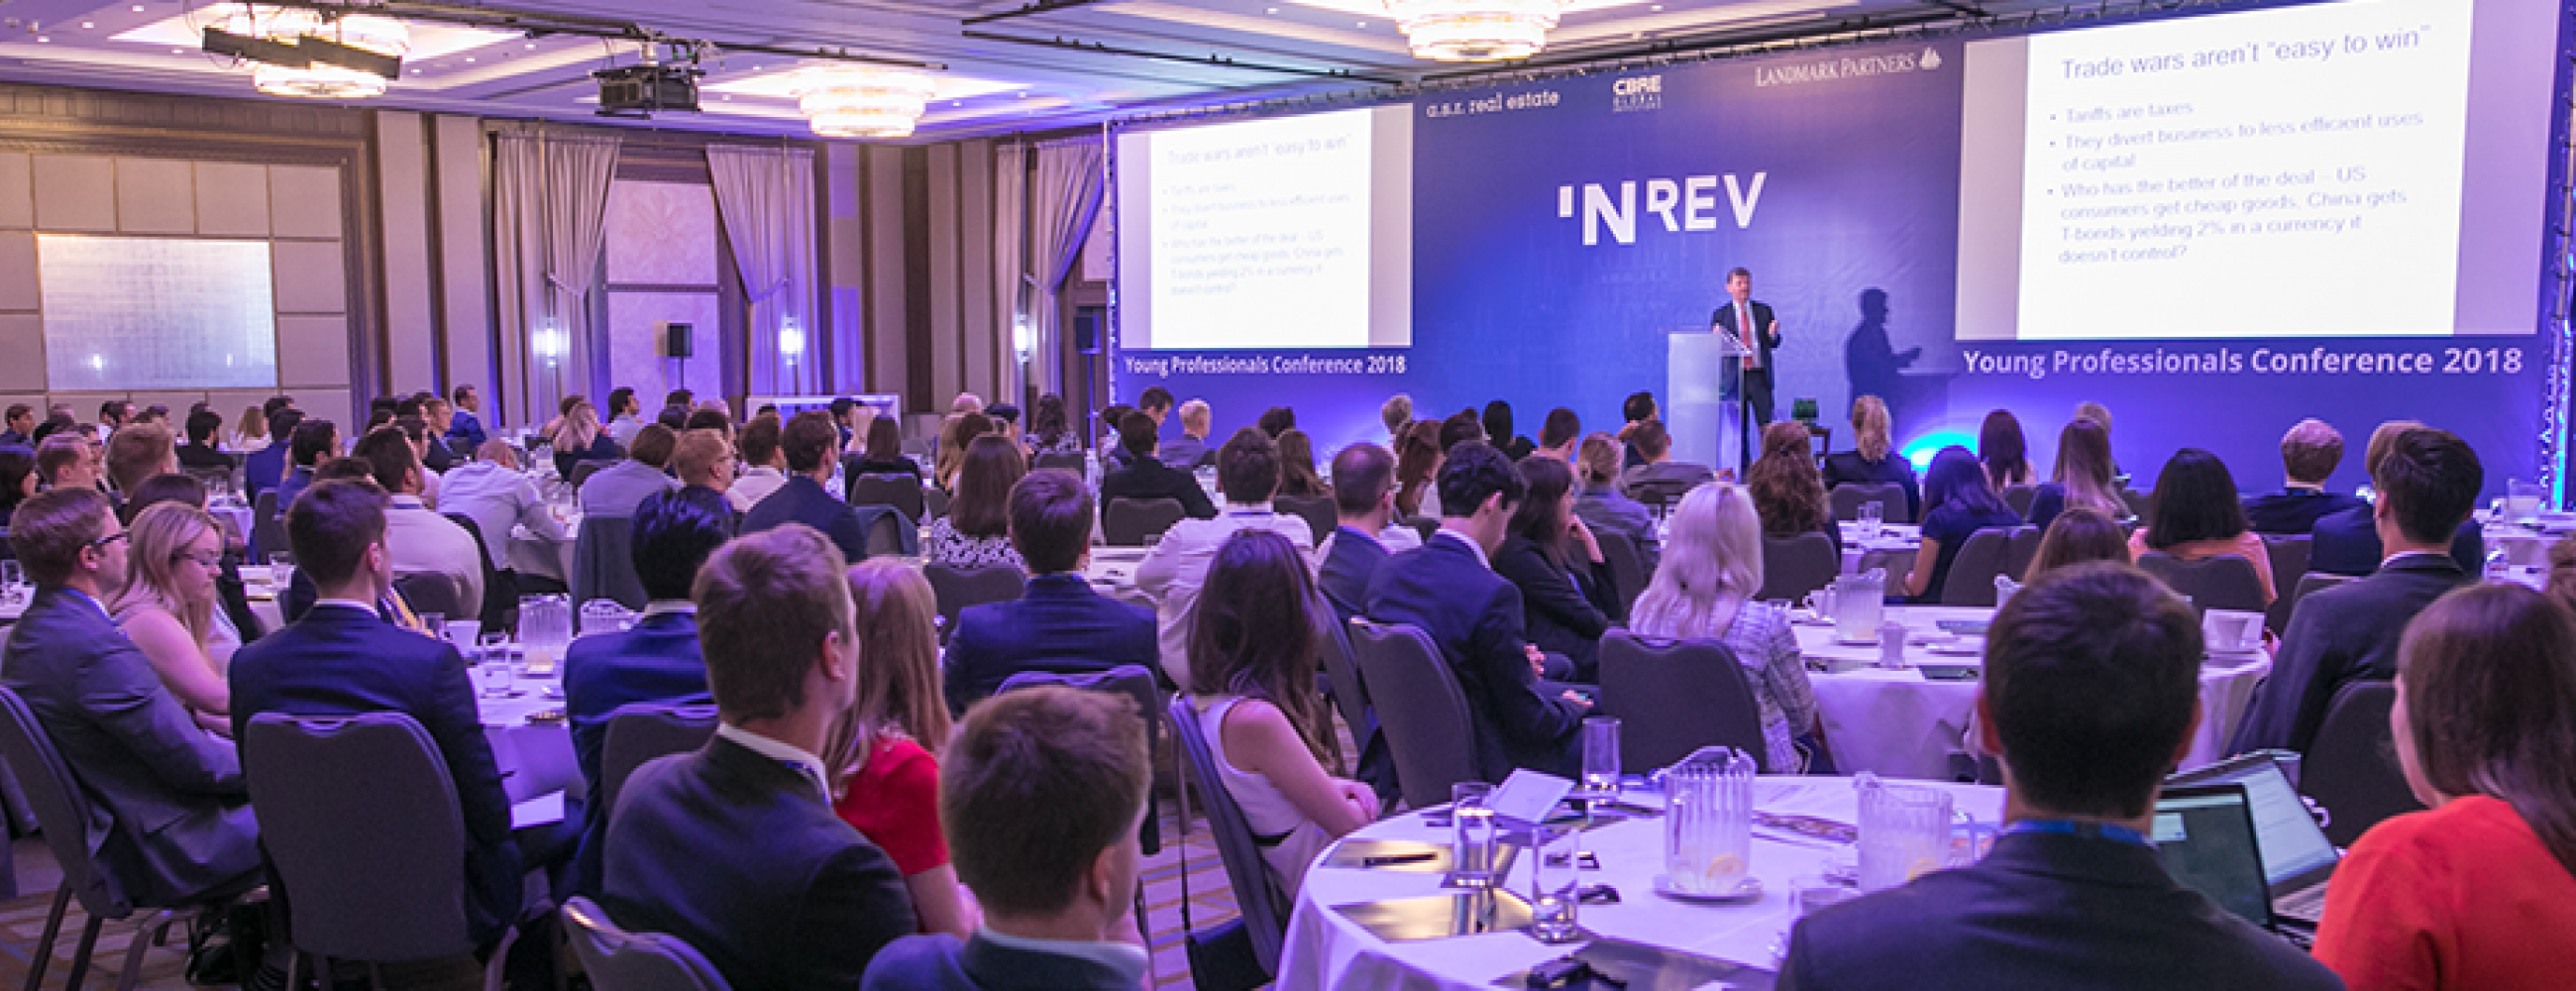 INREV Young Professionals Conference Sponsorship